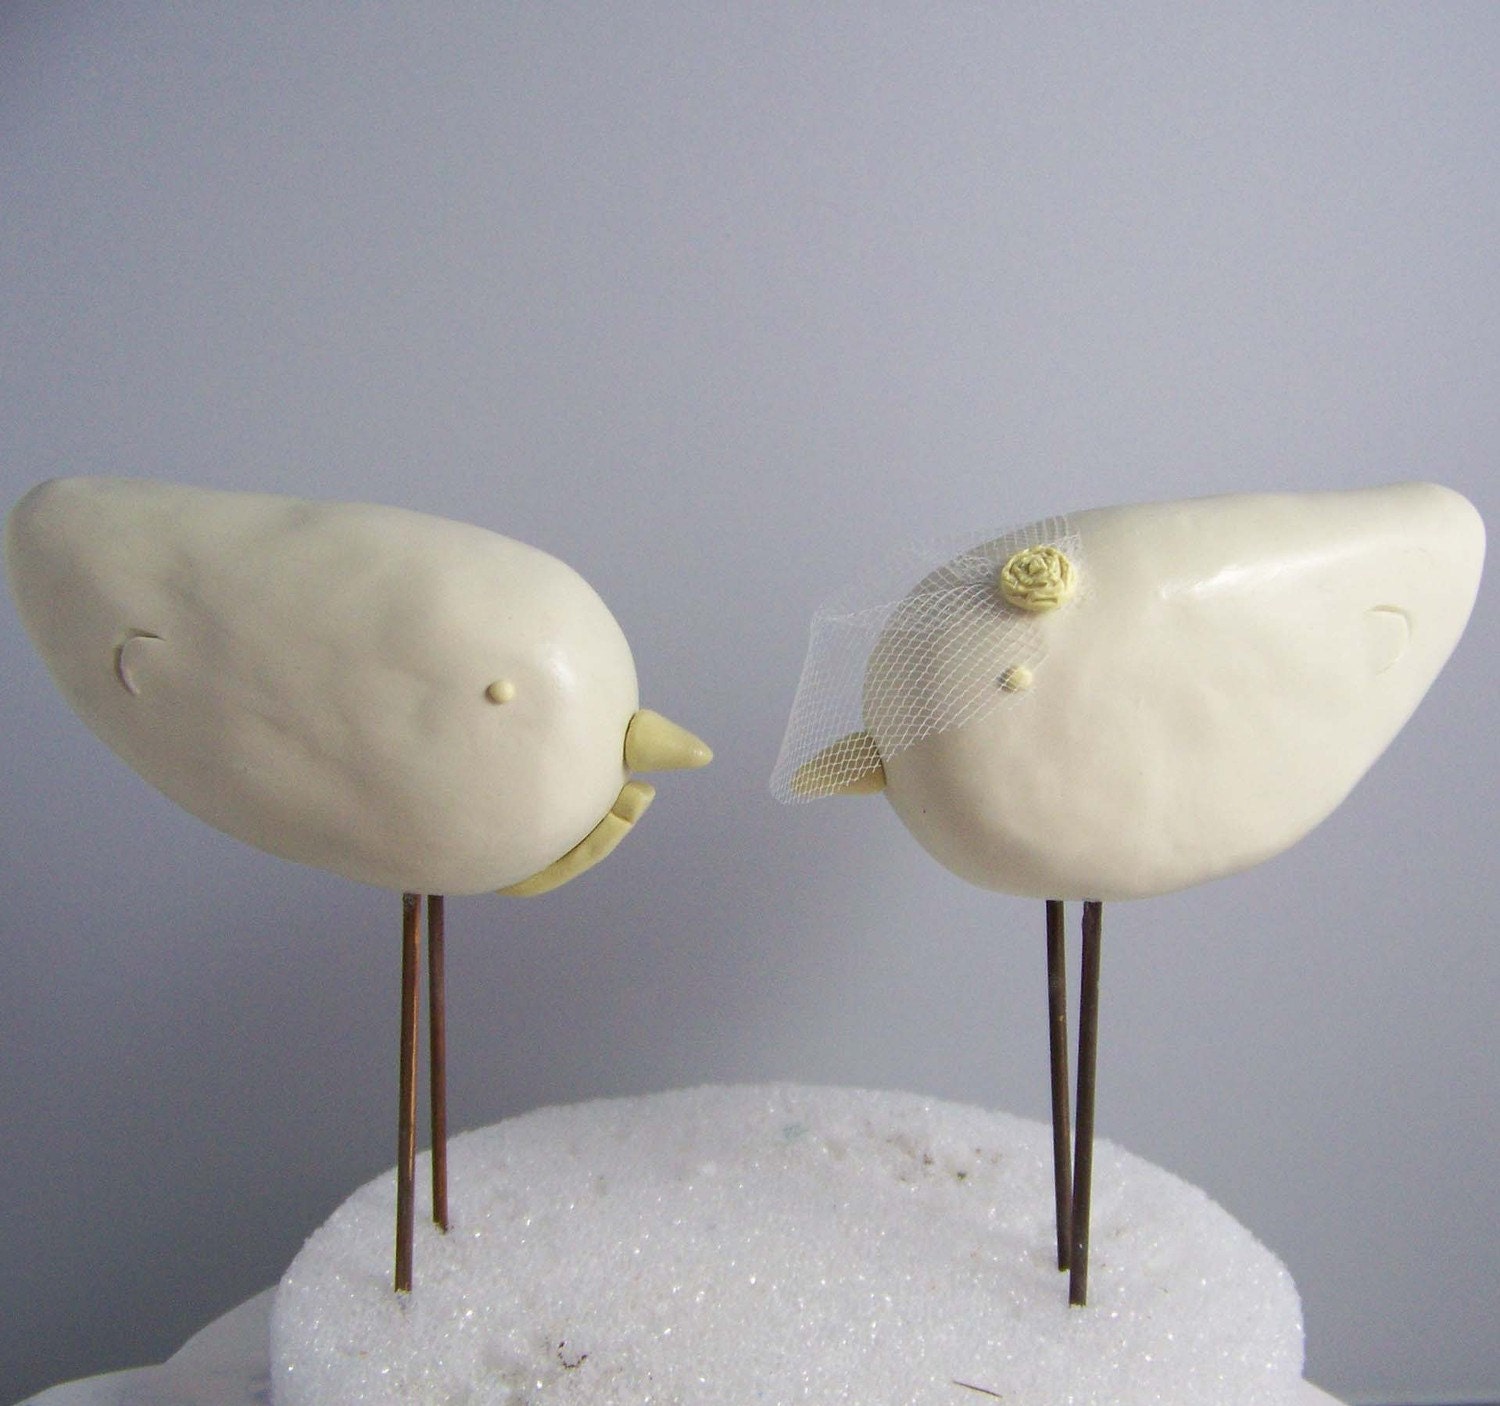 Vintage Style Love Birds Wedding Cake Topper with Tie and Birdcage Veil in